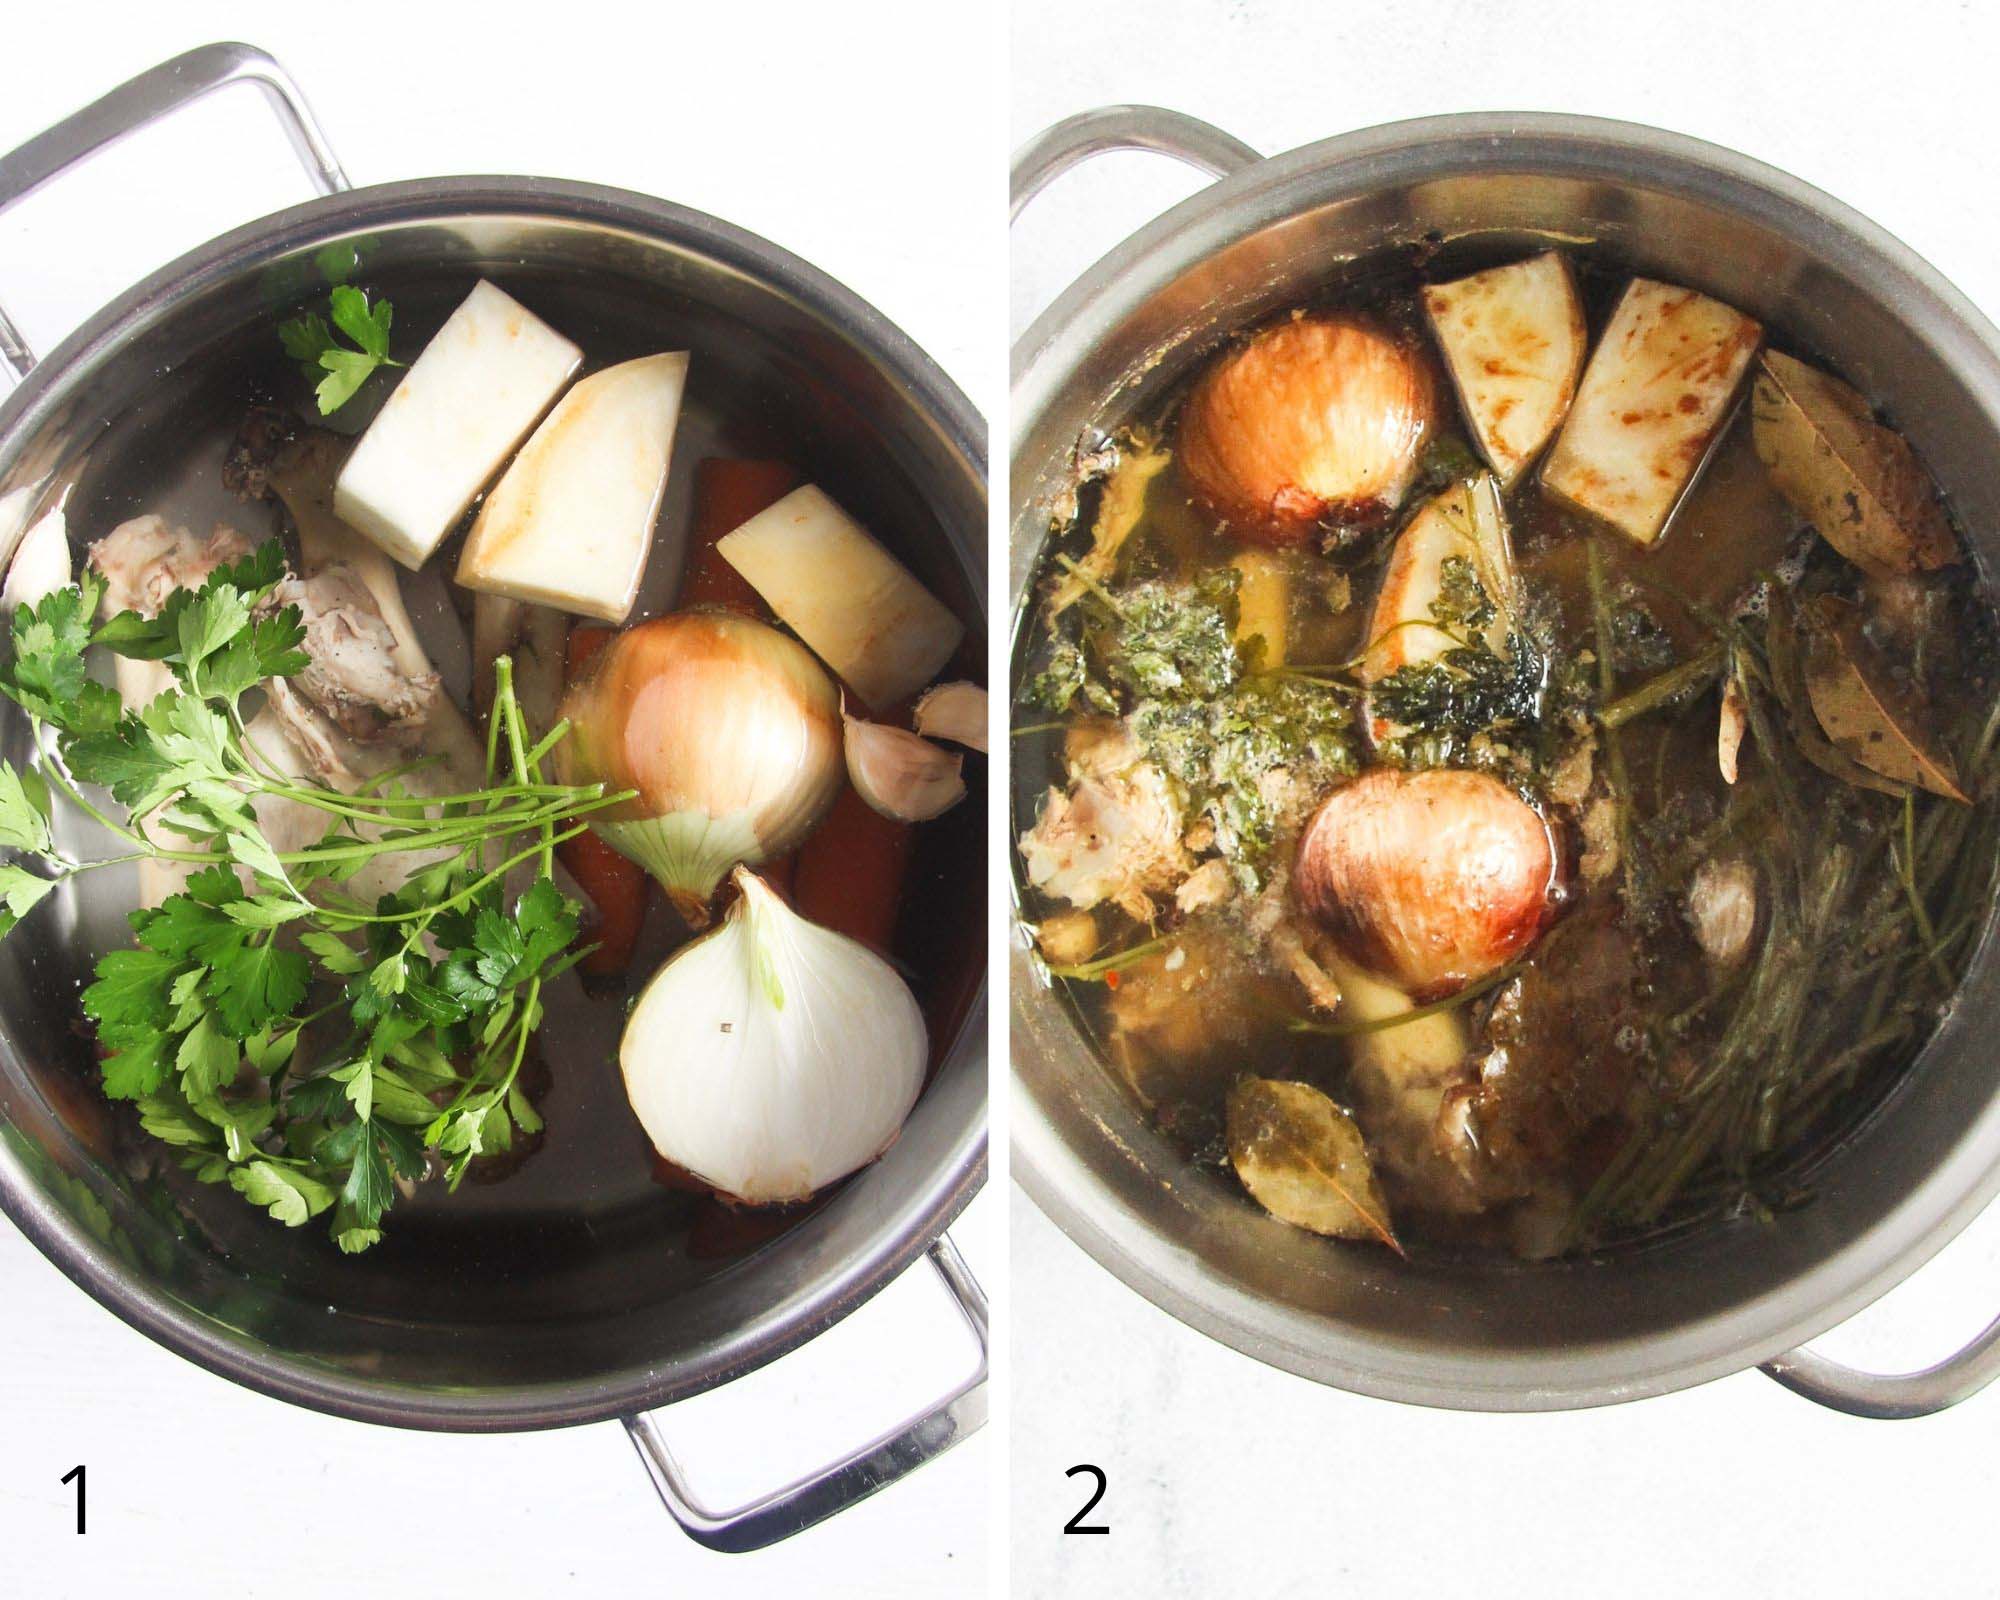 bones and vegetables in a pot before and after cooking broth.